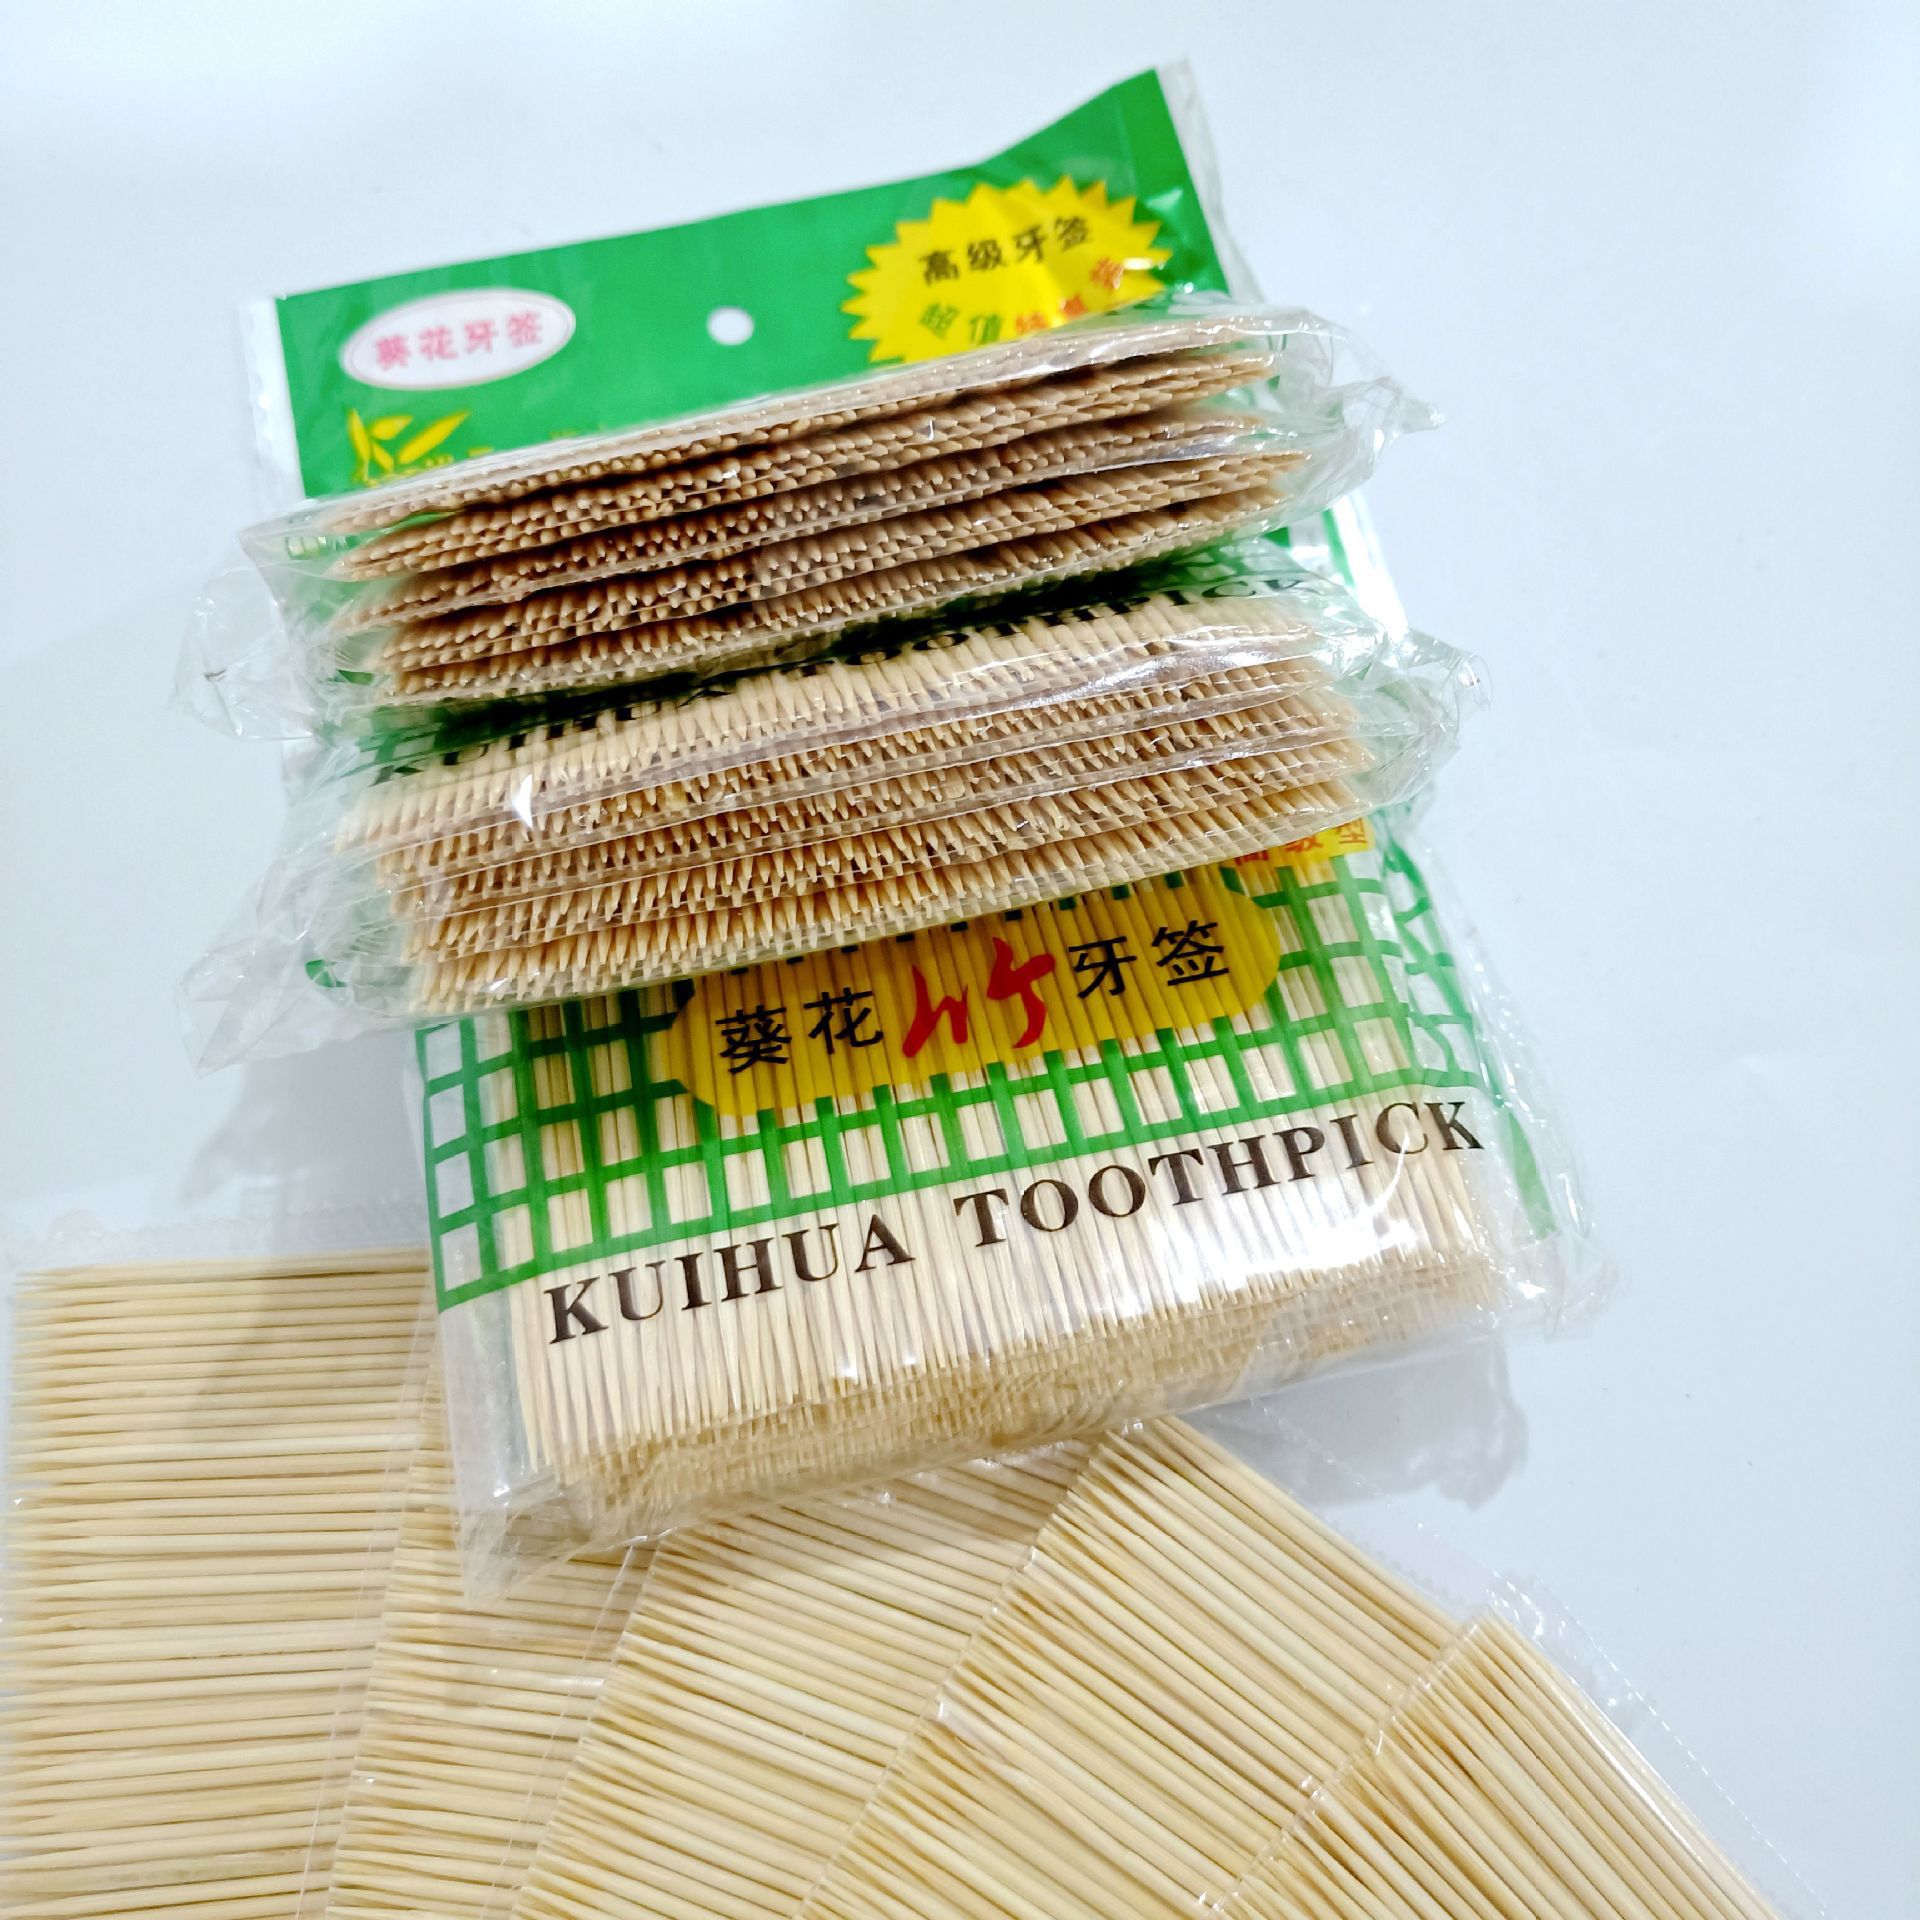 5 Pcs Toothpick Bag Toothpick Bamboo Stick Restaurant Restaurant Affordable Toothpick Double-Headed Toothpick 2 Yuan Supply Wholesale